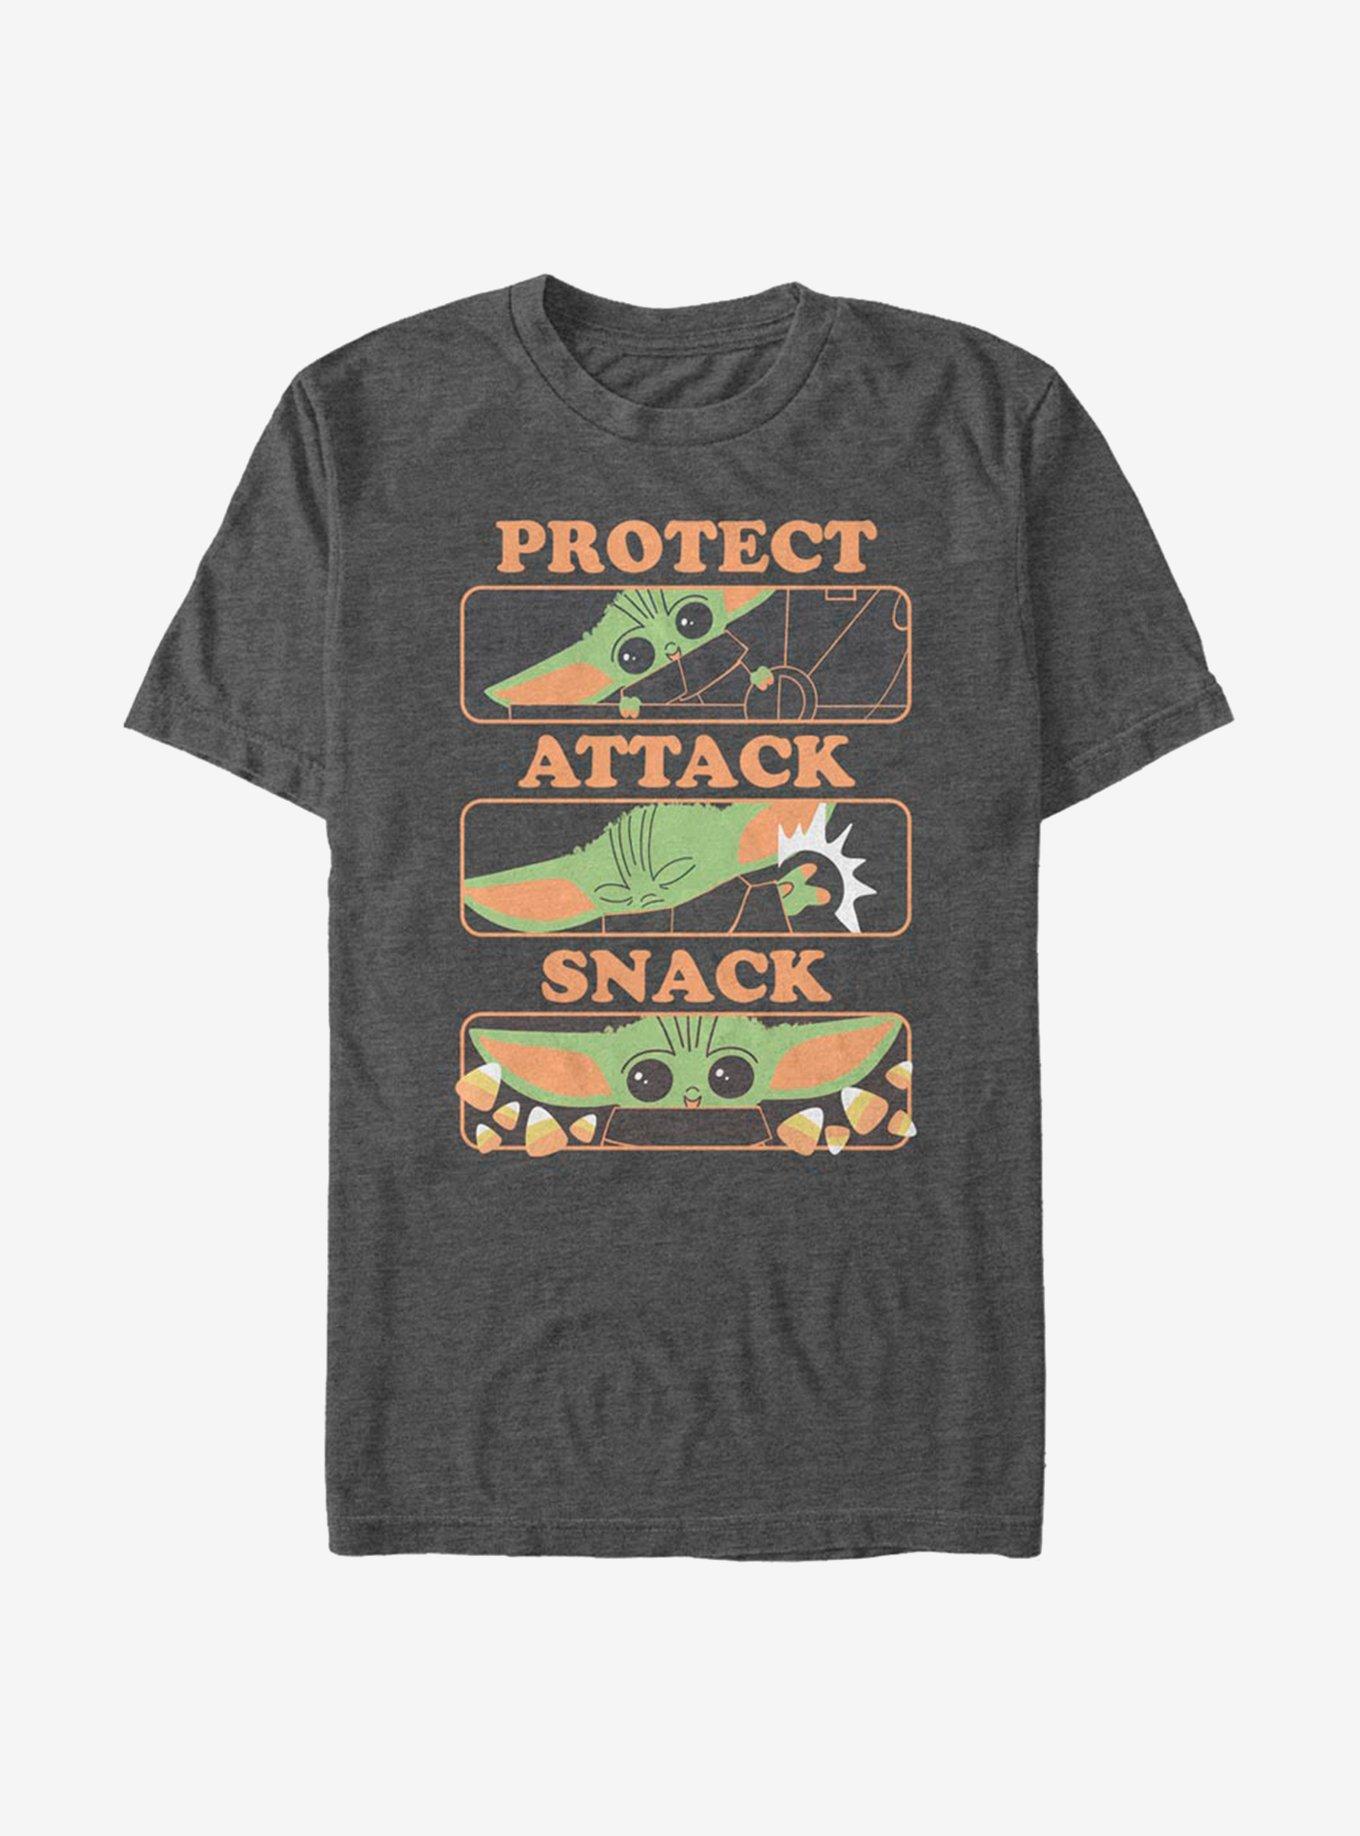 Star Wars The Mandalorian The Child Protect And Snack T-Shirt, CHAR HTR, hi-res